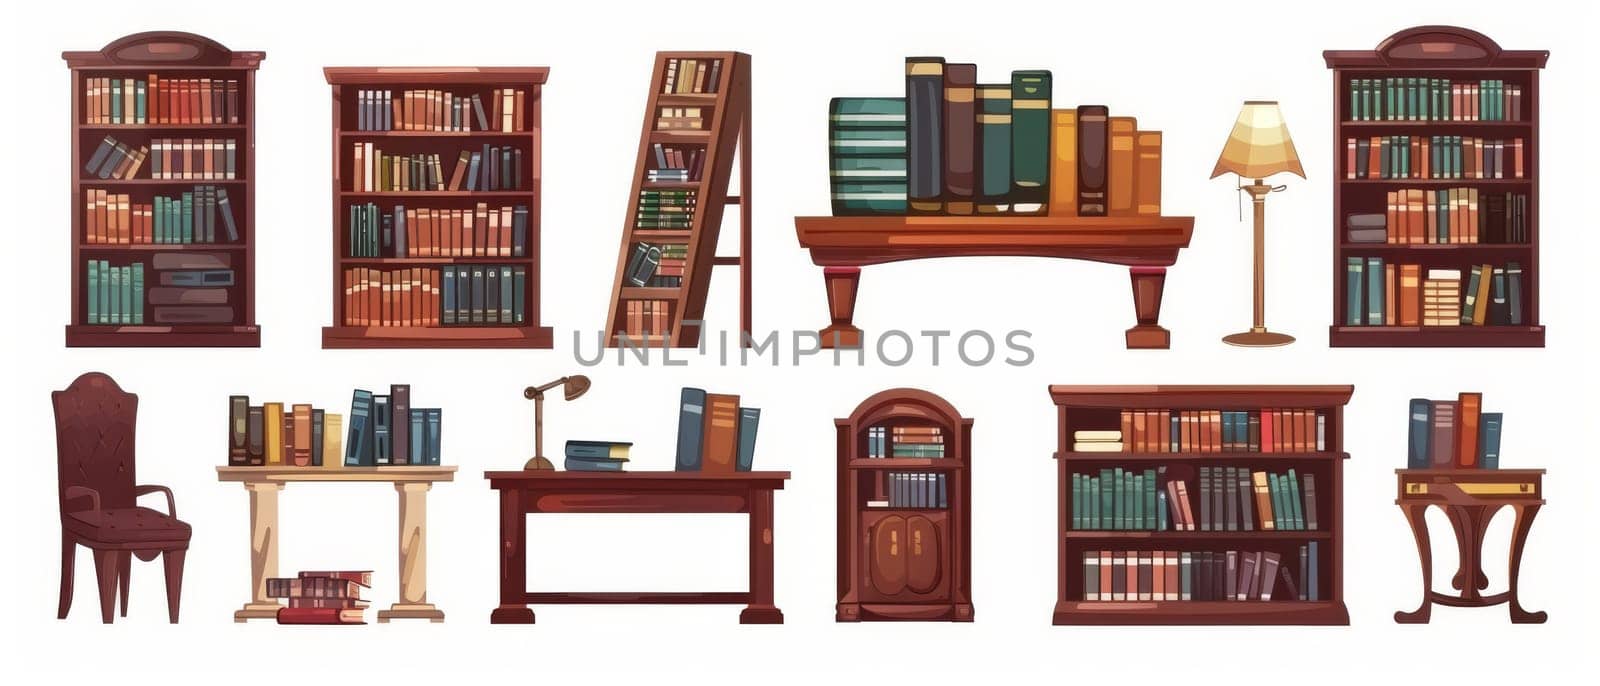 Bookcases, stacks, open shelves and wooden tables and chairs with lamps depict the contents of a public library as a cartoon illustration set.